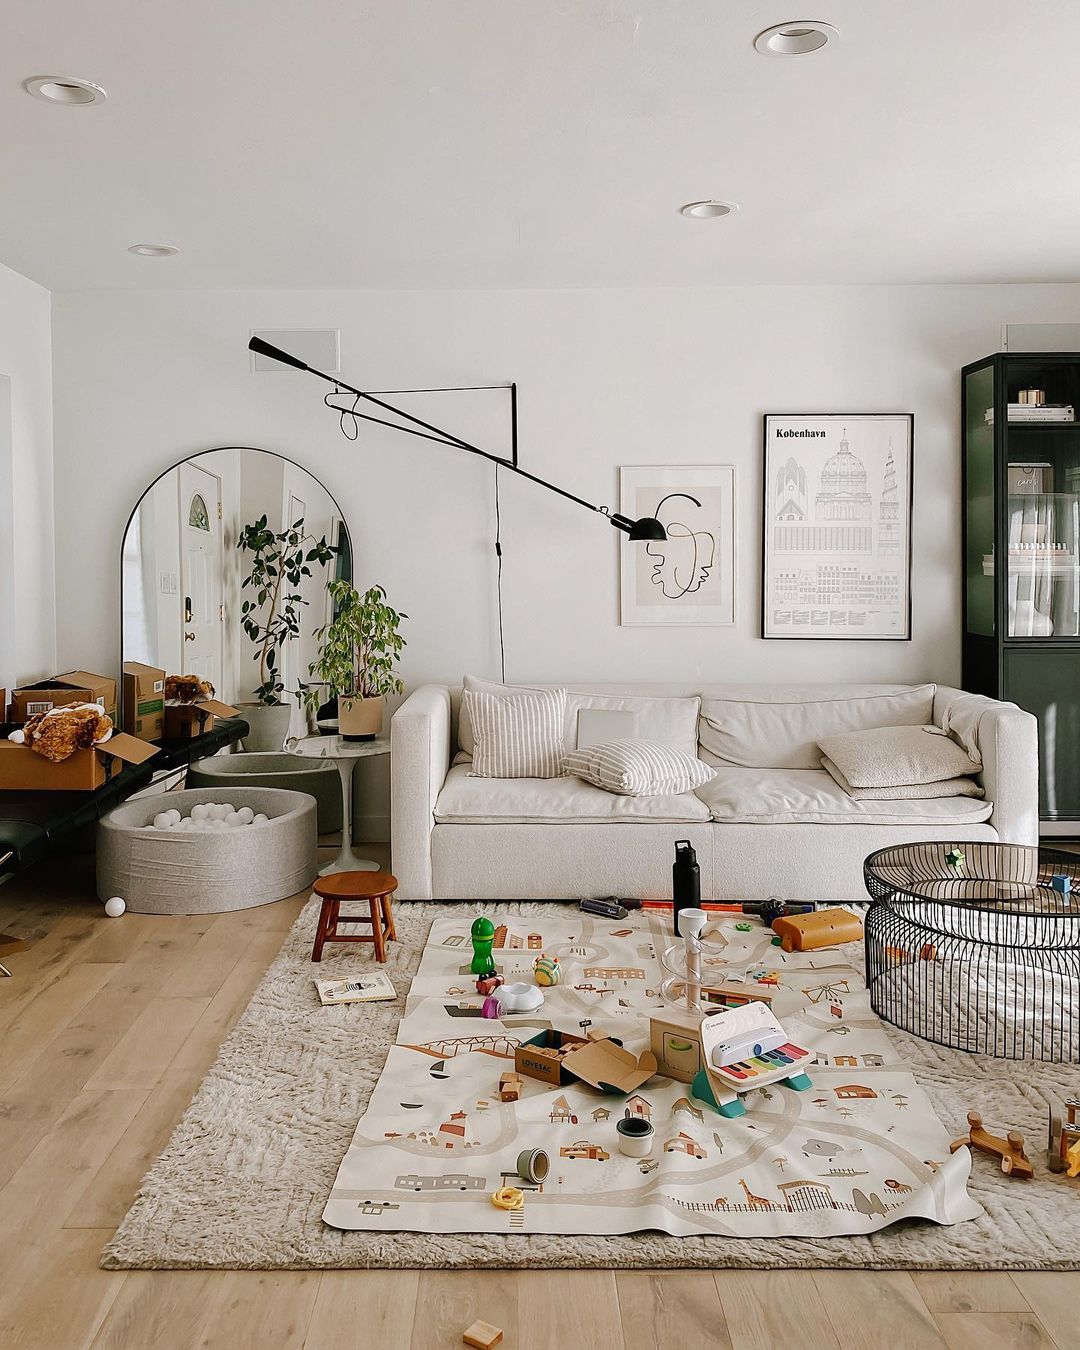 Living room with baby toys on the floor. Photo by @homeyohmy